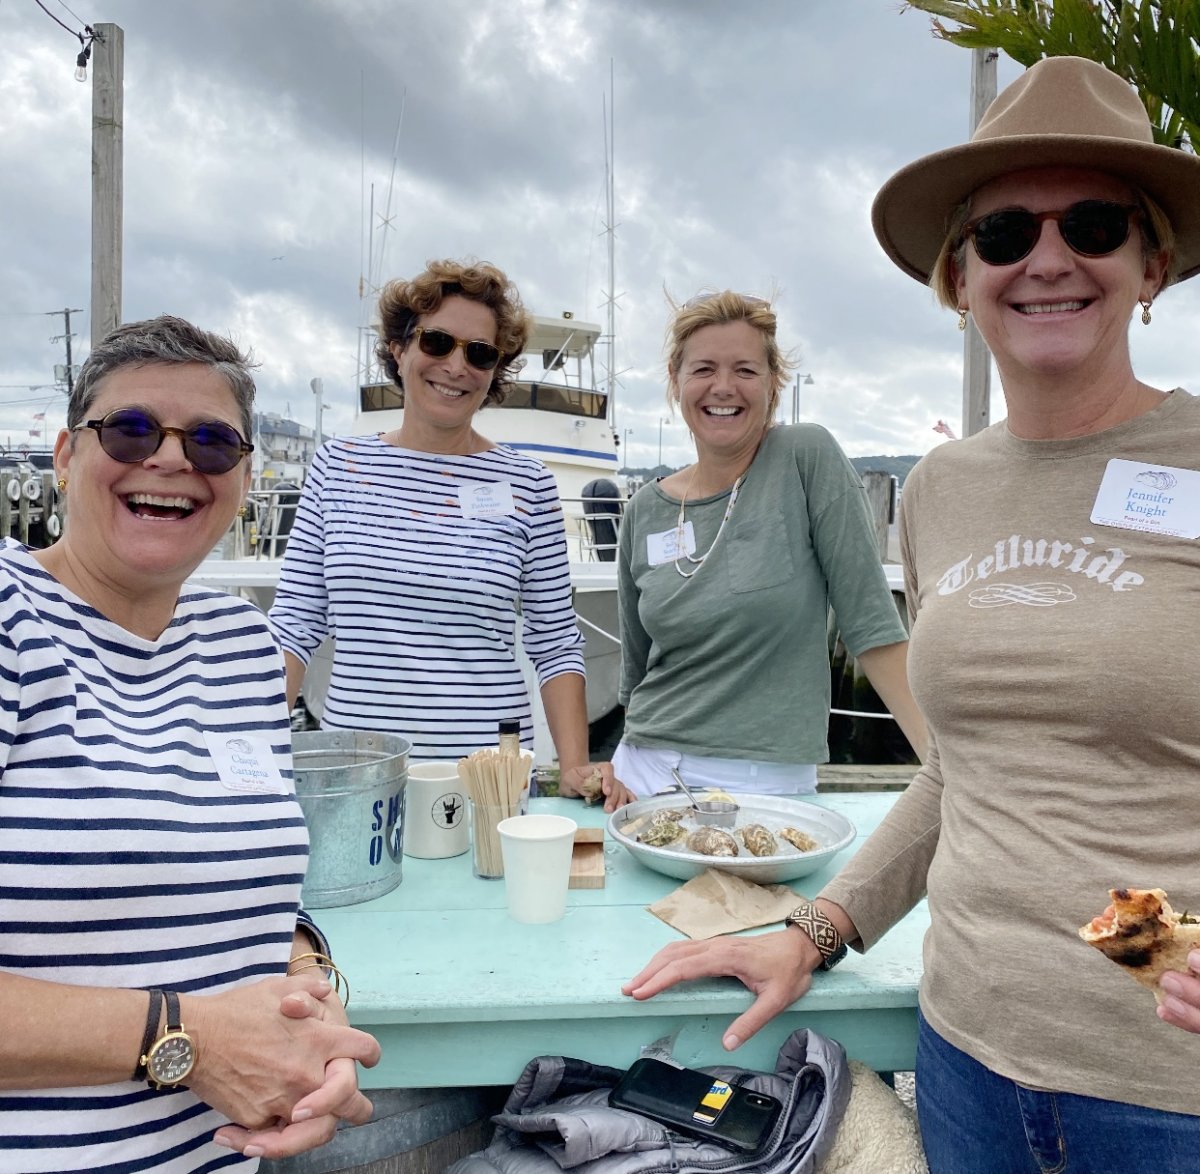 The North Fork Women at their Oyster Extravaganza